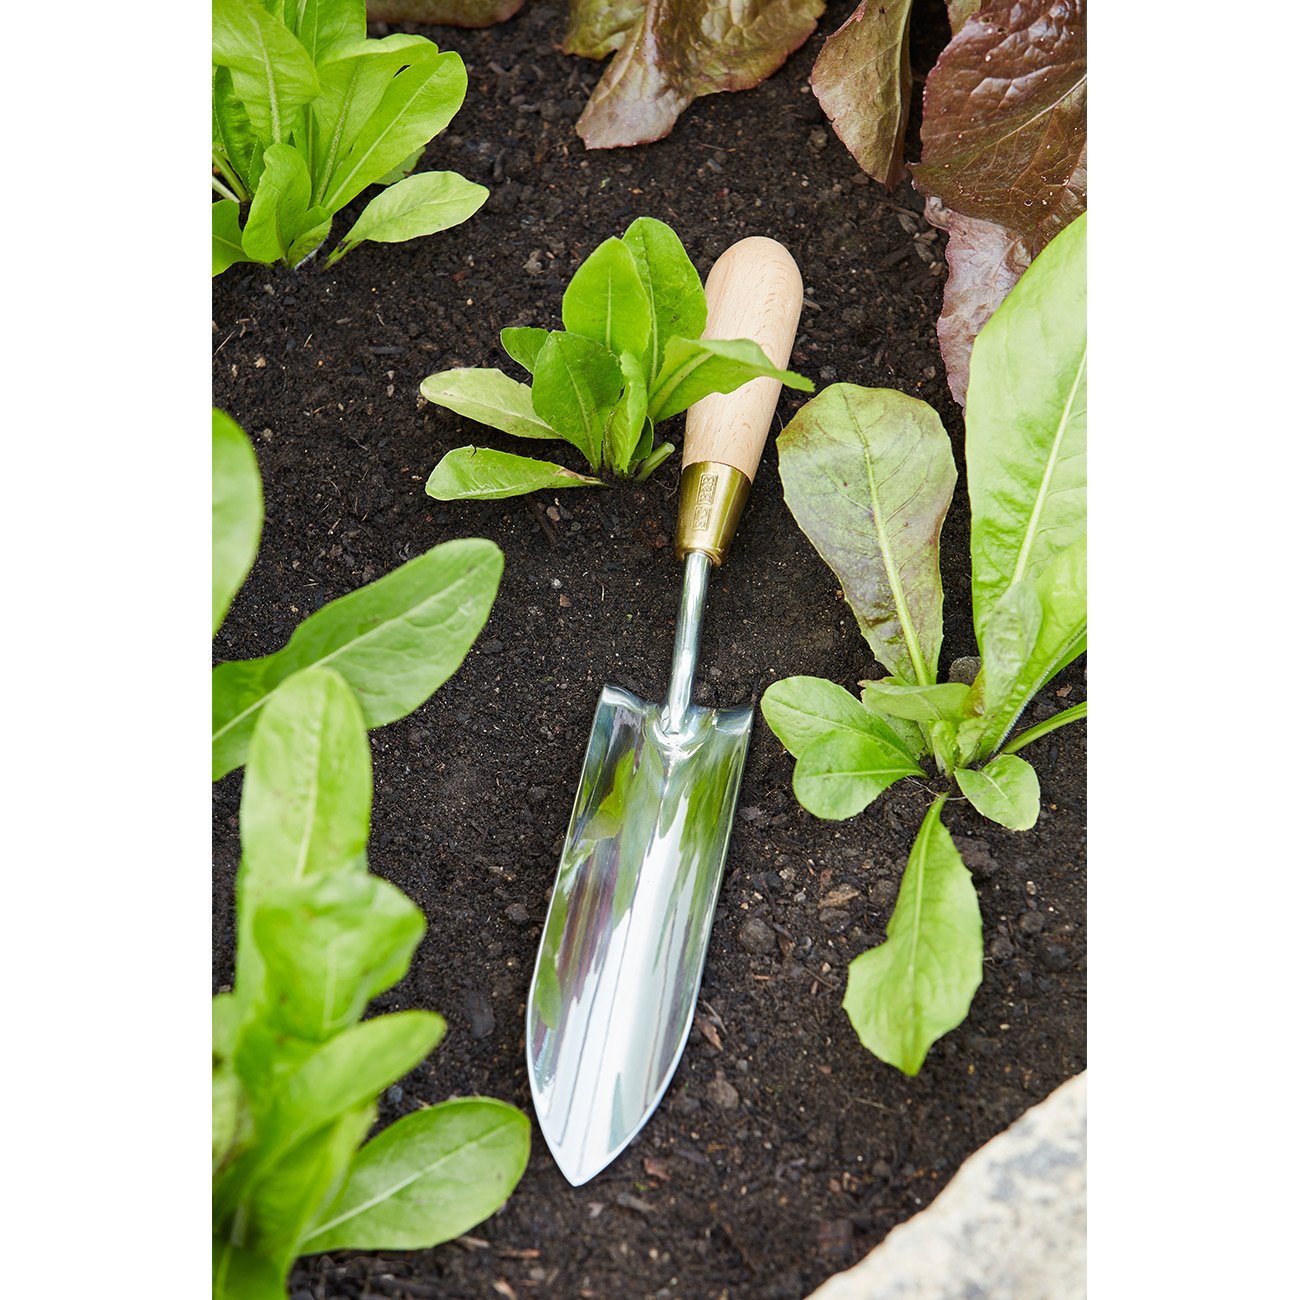 This long thin trowel is an invaluable garden tool, extremely useful for a large variety of gardening tasks. From digging in tight spaces to planting bulbs and long-rooted seedlings such as sweet peas, general weeding, as well as specifically weeding out long tap-rooted plants, the unique shape of this hand tool allows access where a trowel won’t fit.